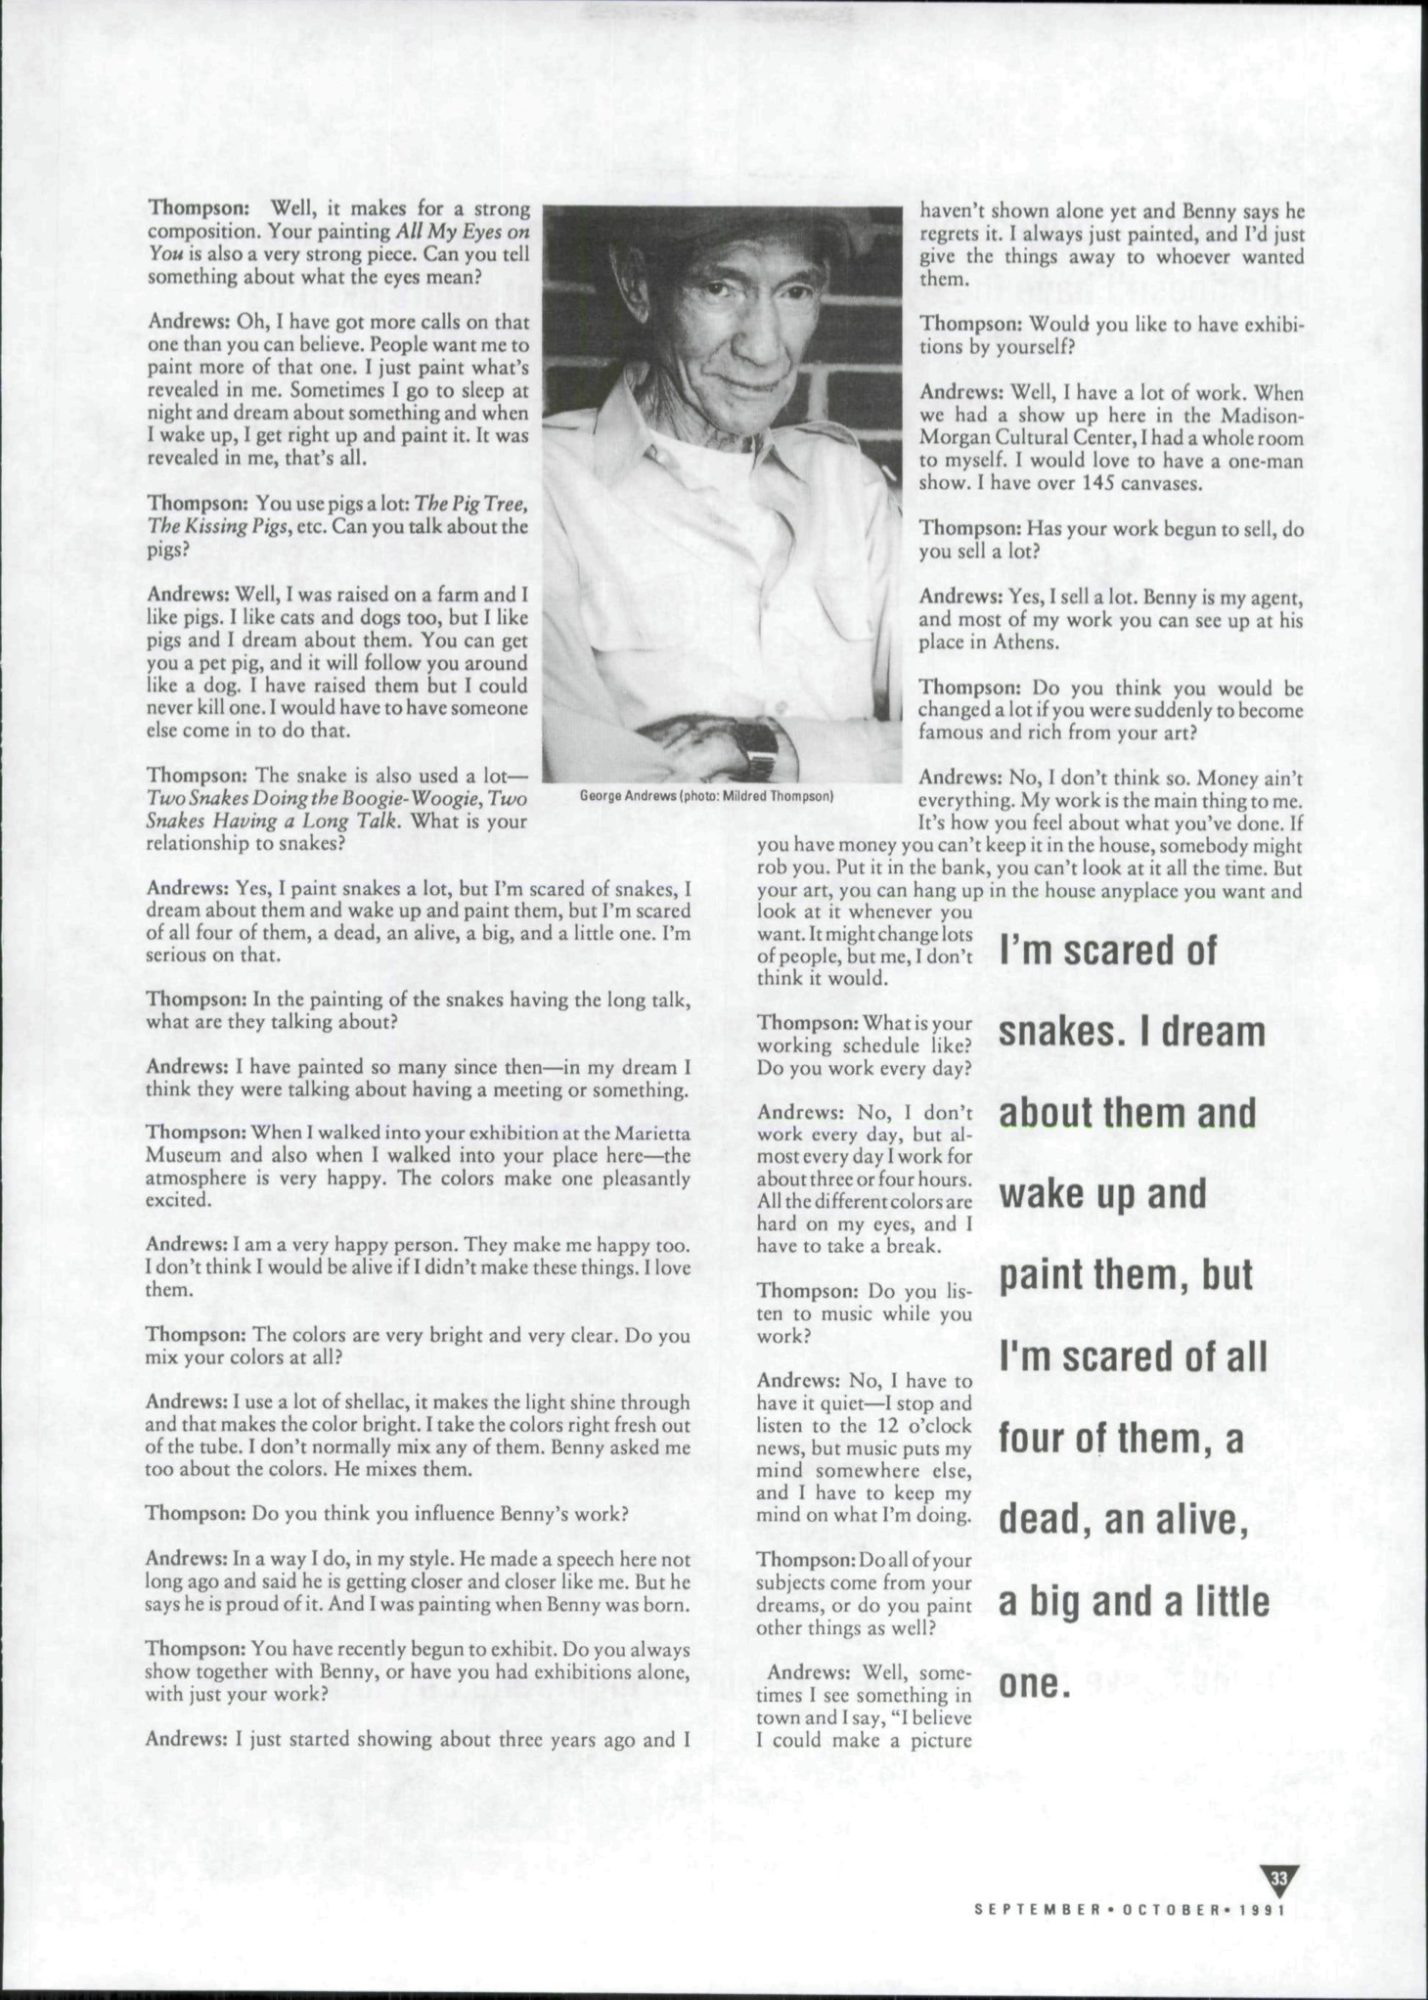 Scan of an Interview between Mildred Thompson and George Andrews.